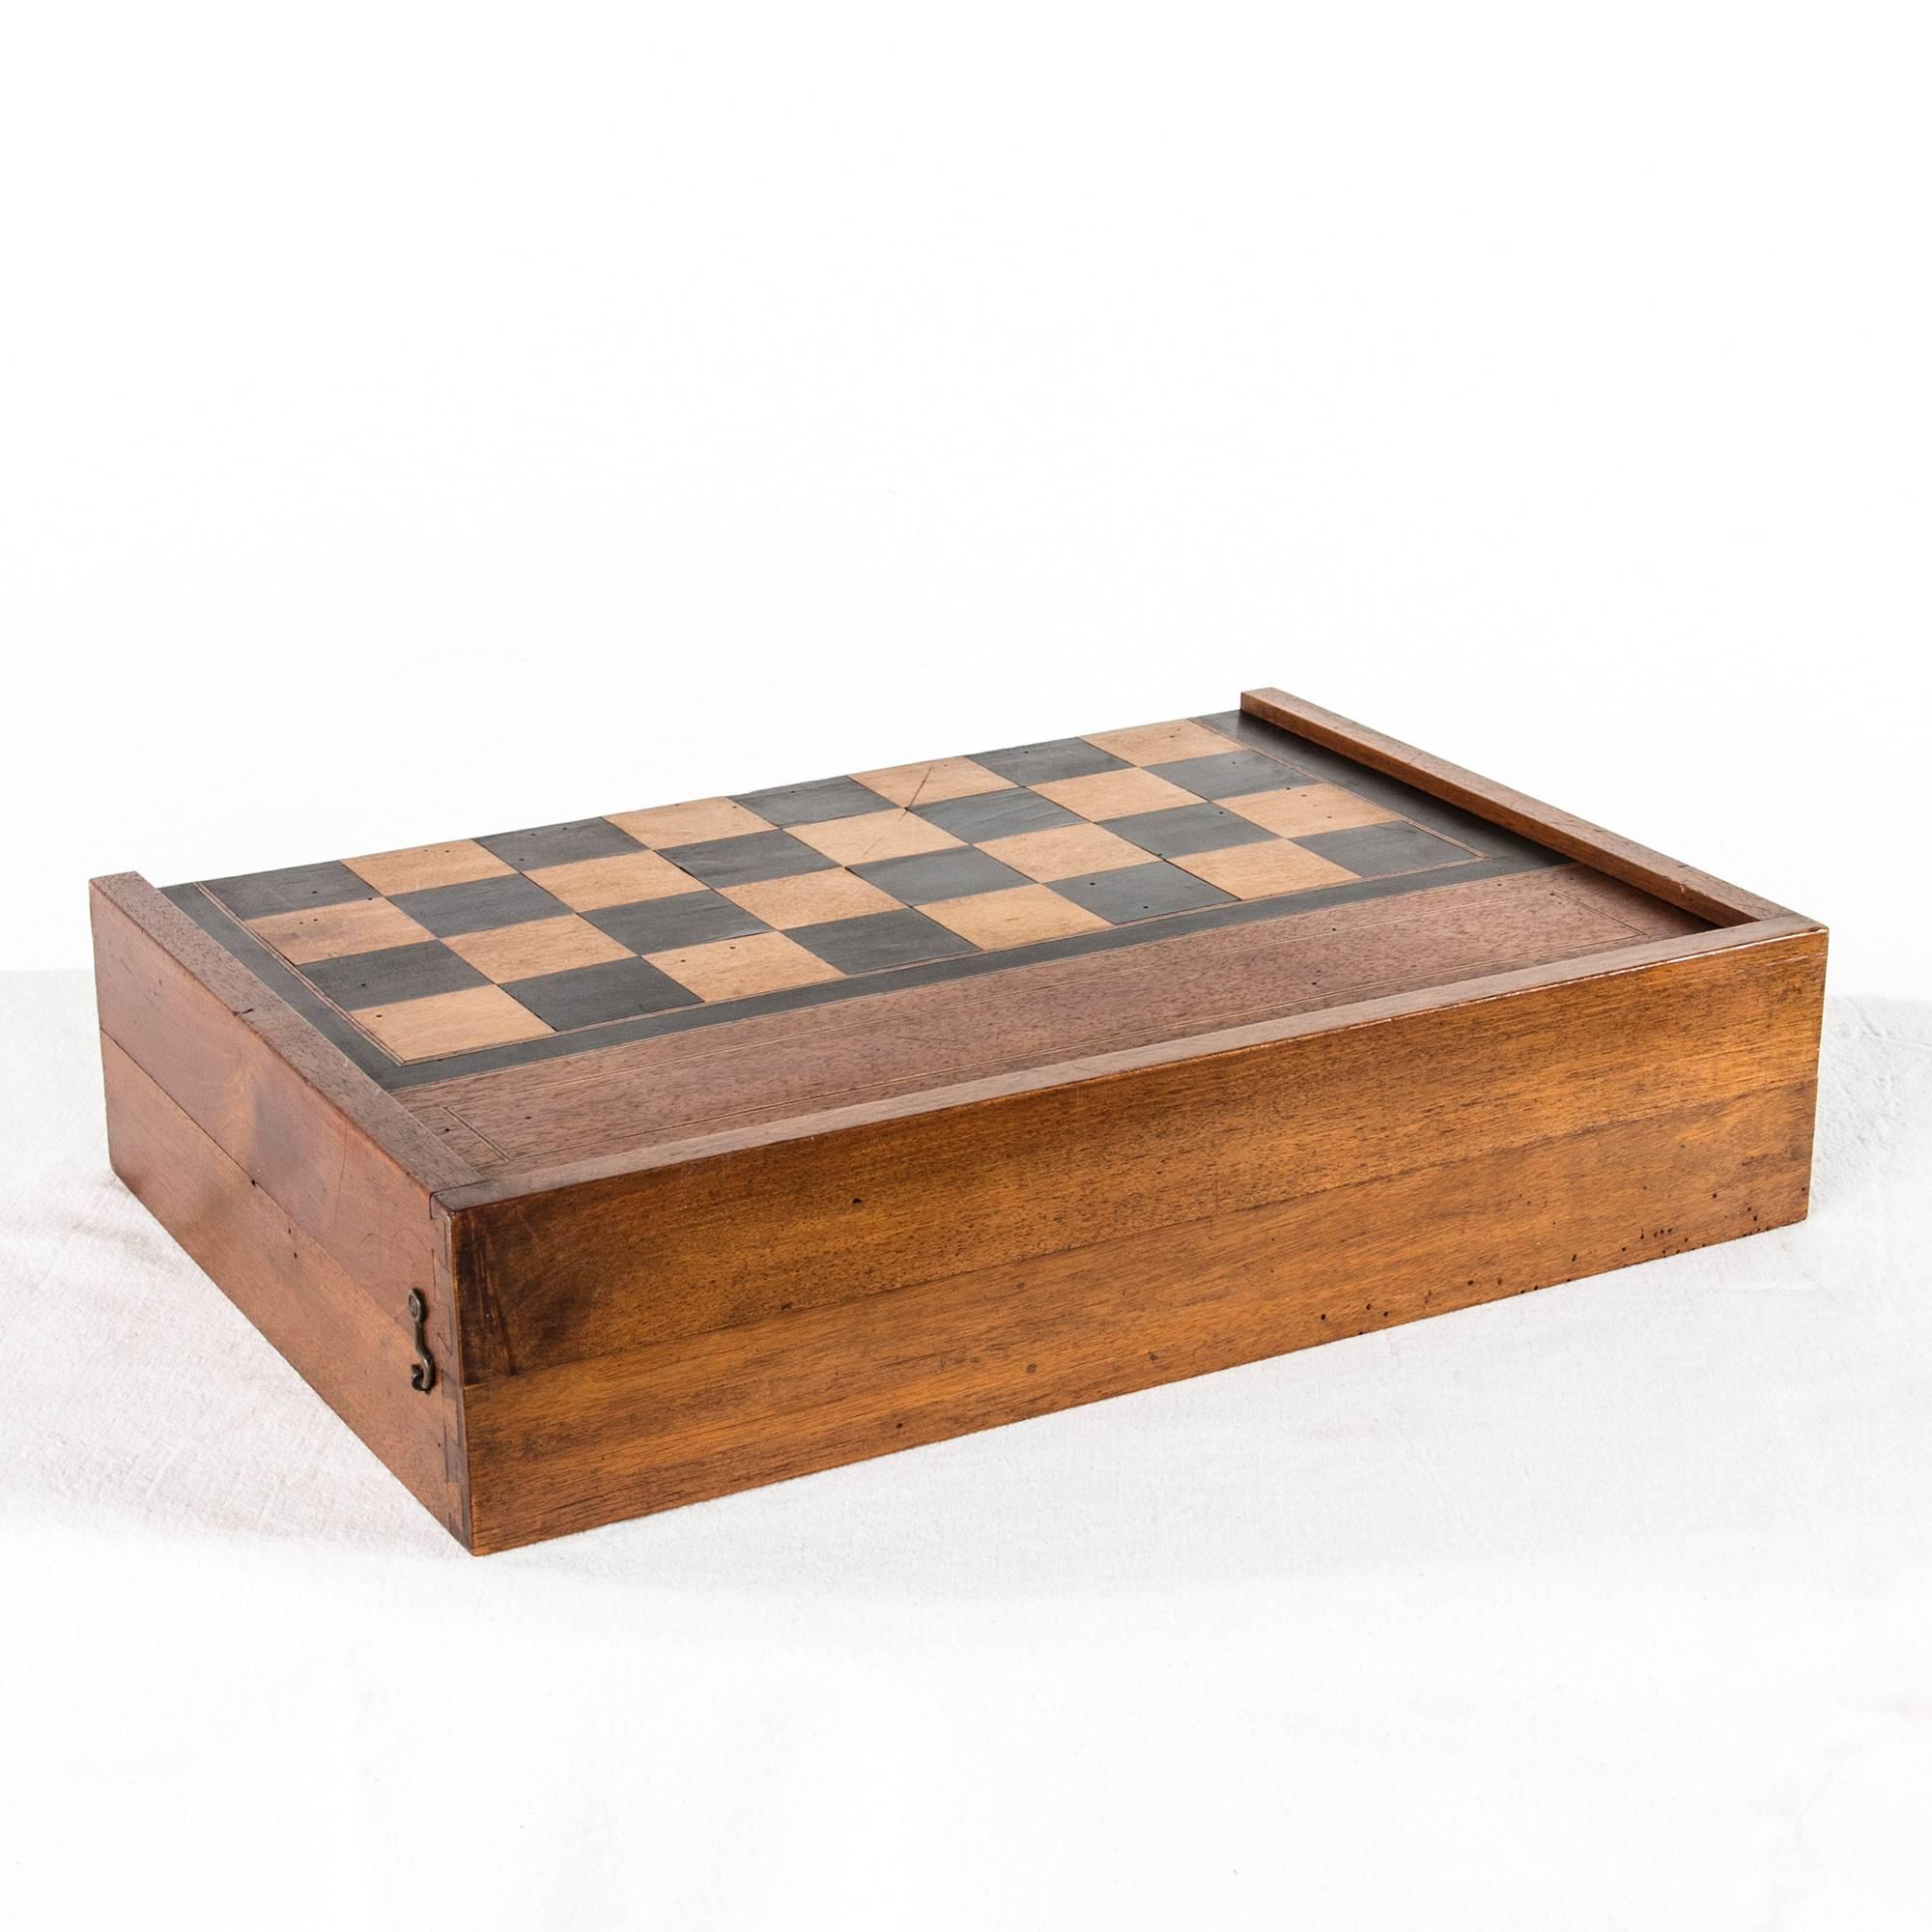 An artisan made, circa 1900 game board and box, this piece is meant for checkers, chess, or backgammon. Complete with leather cups, a set of wooden game pieces, and two pairs of dice, this large game surface closes to make an elegant tabletop box